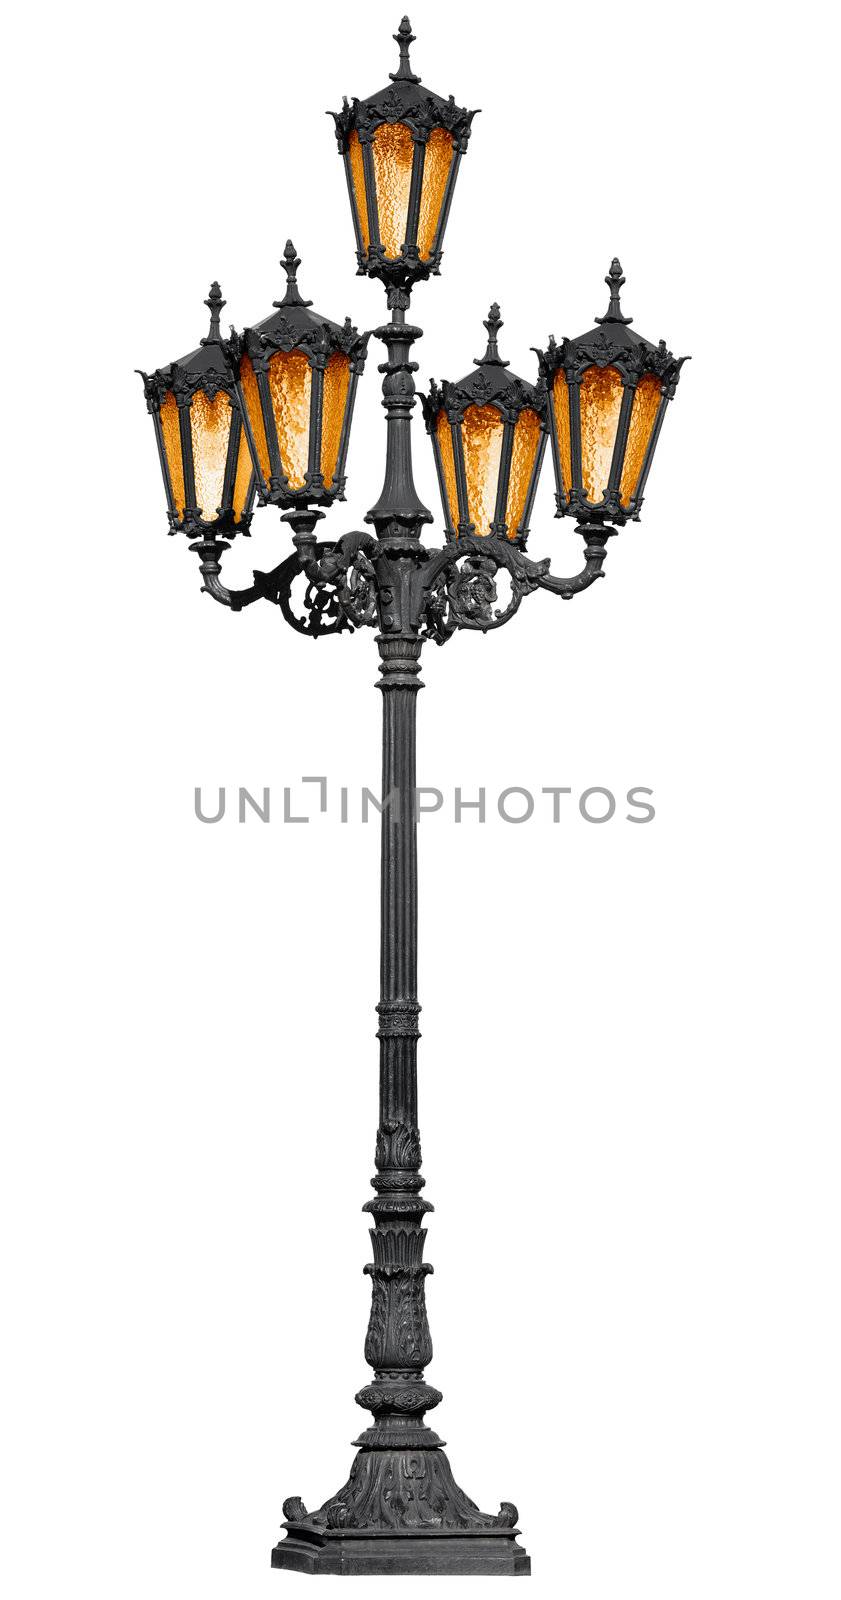 Antique cast iron lamp post isolated on white background